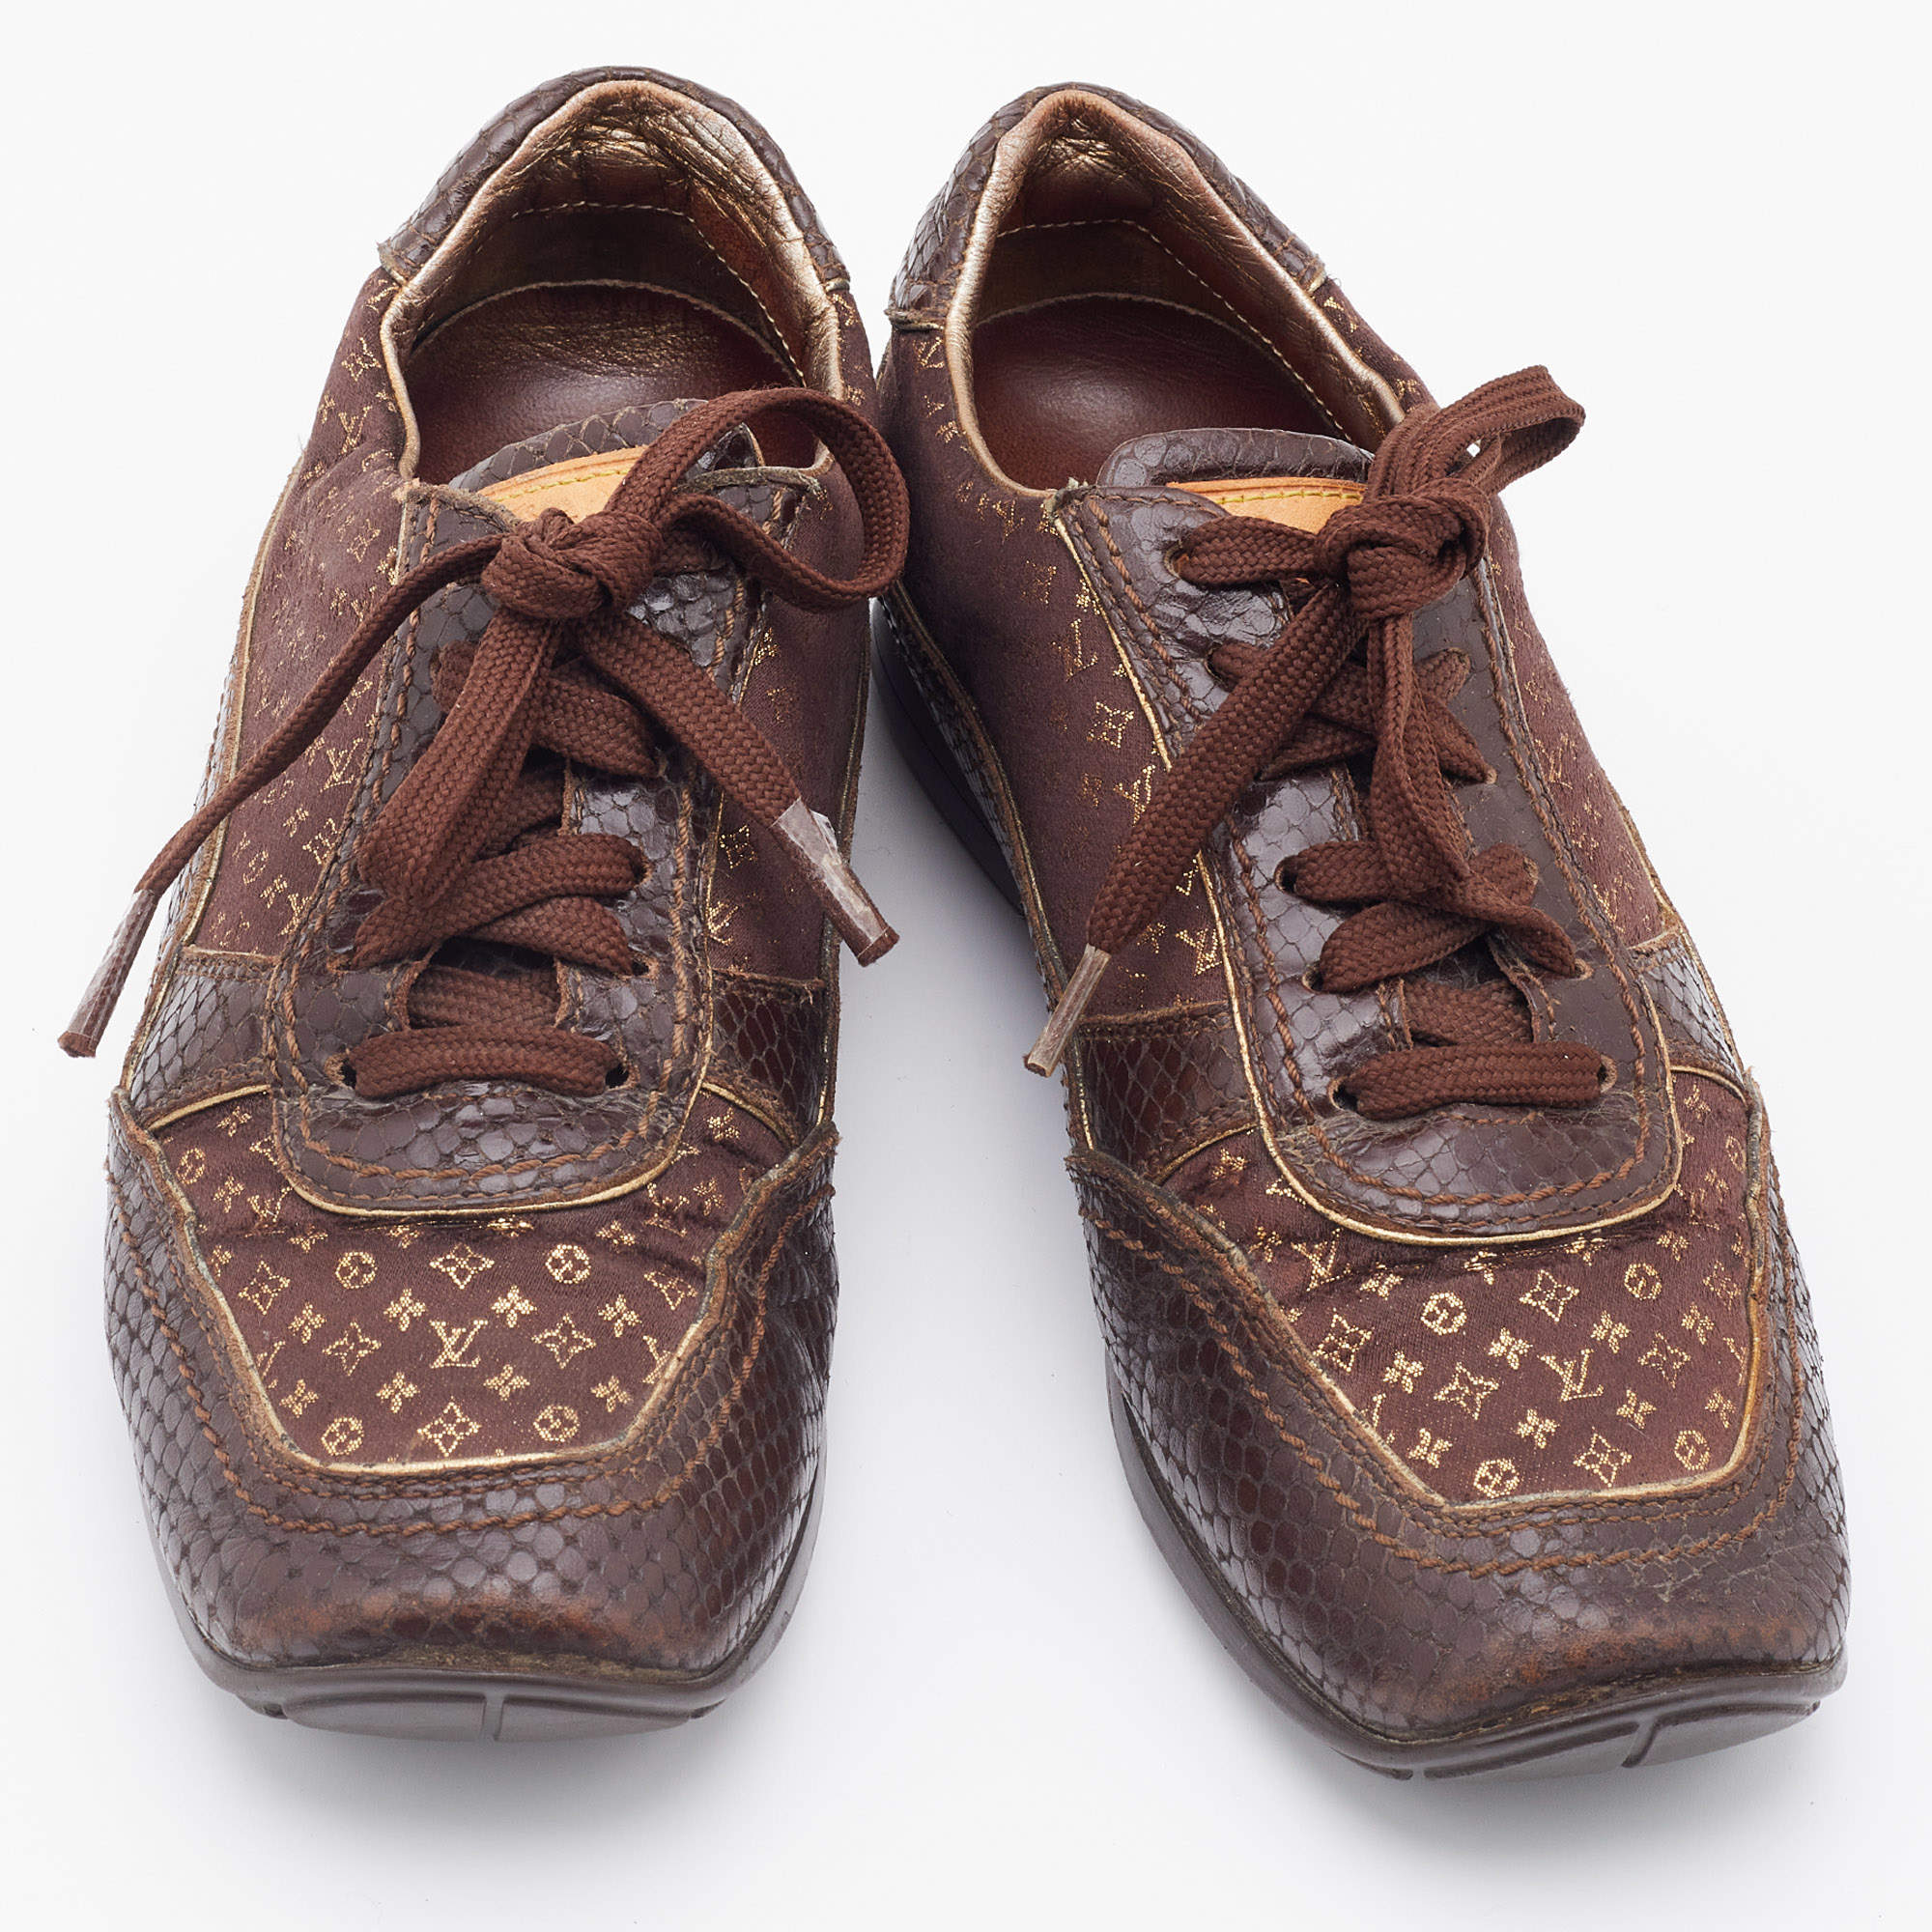 Louis Vuitton Monogram Fabric and Python Embossed Leather Low Top Sneakers  Size 37 Louis Vuitton